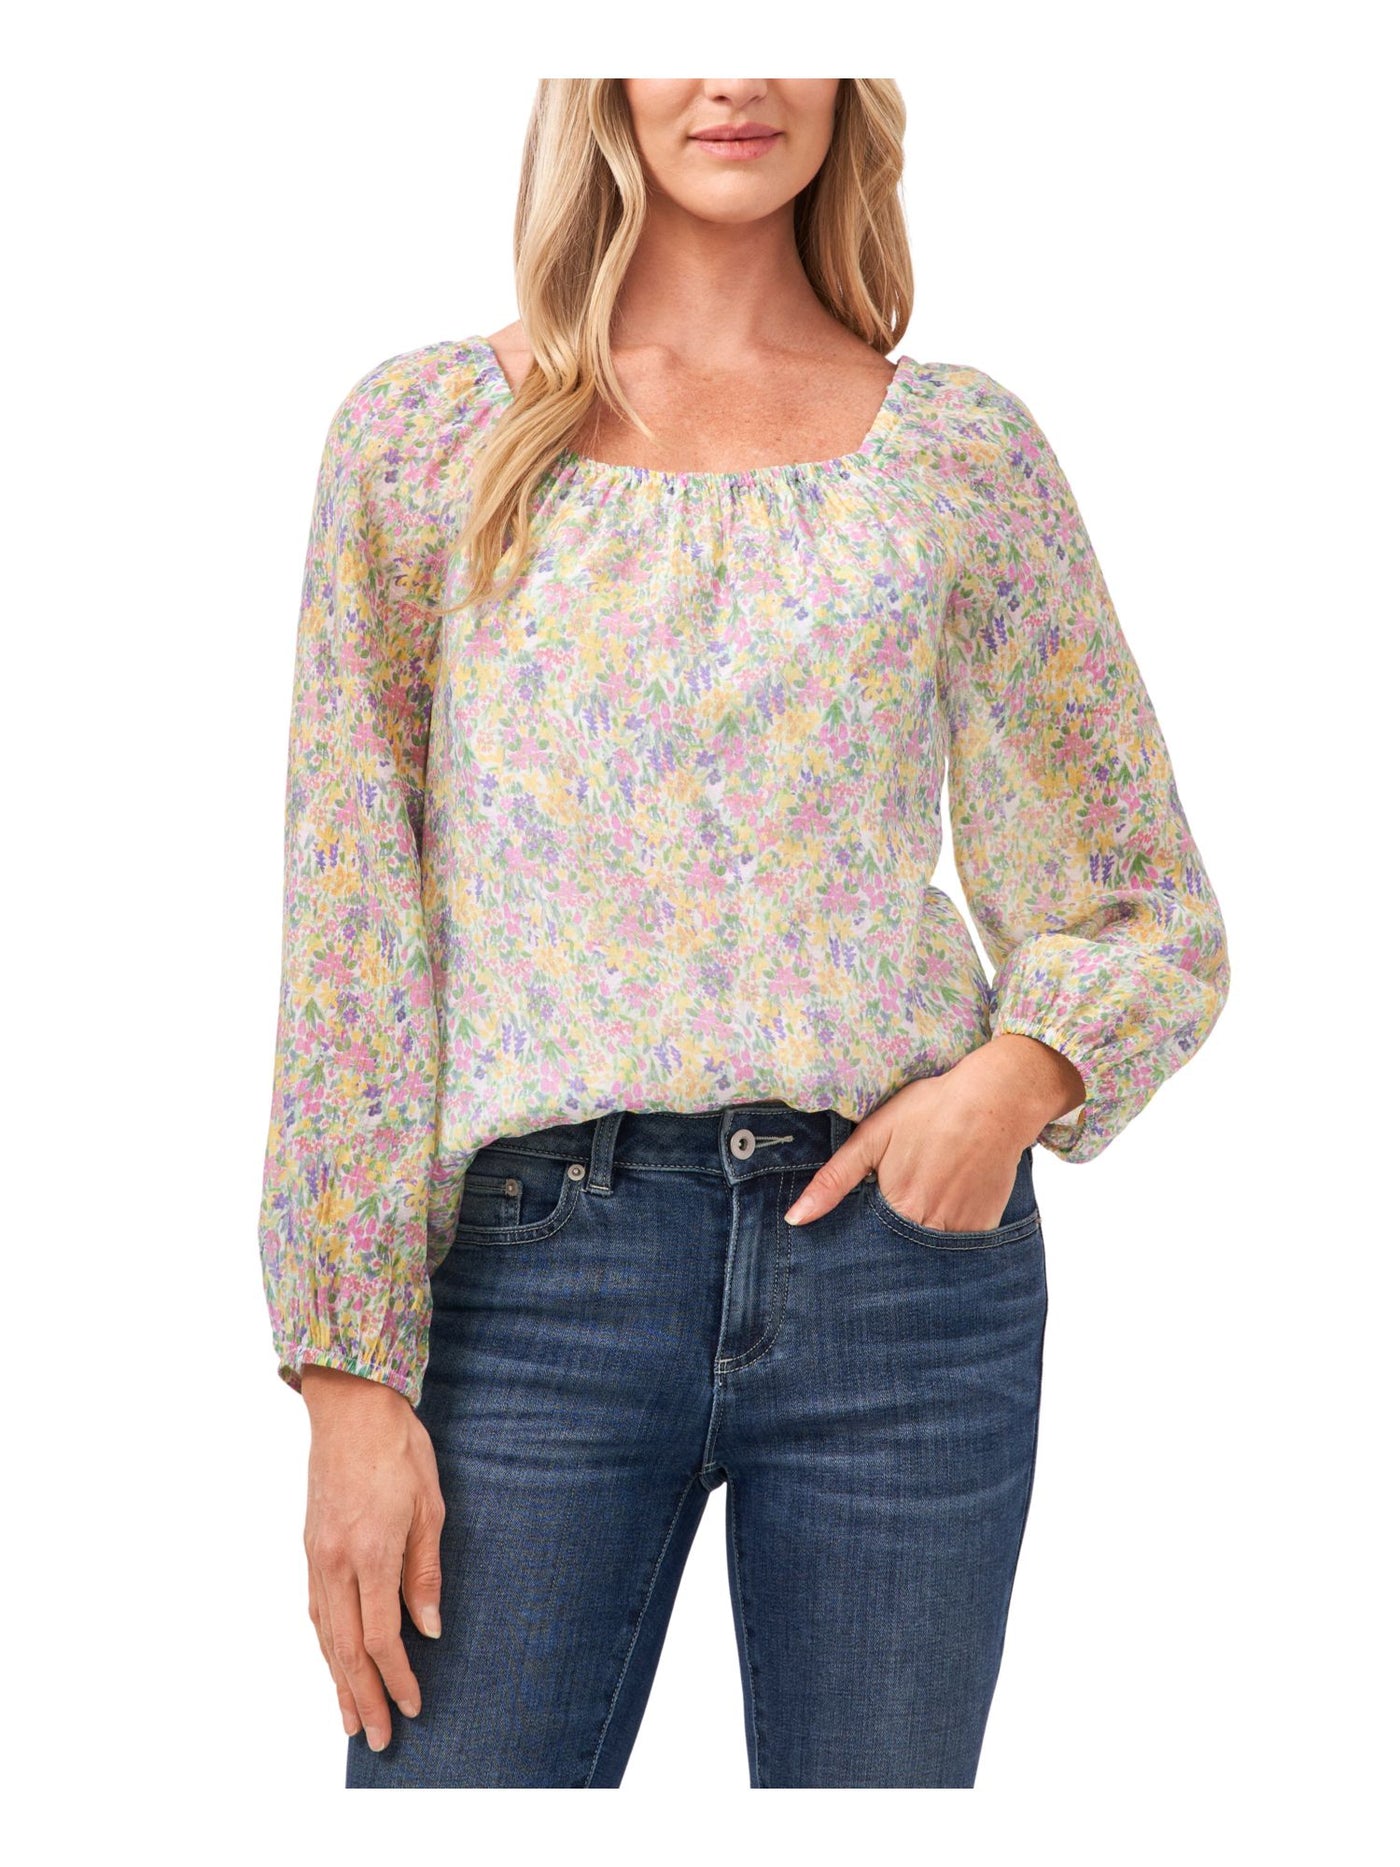 CECE Womens Green Floral Long Sleeve Square Neck Top L